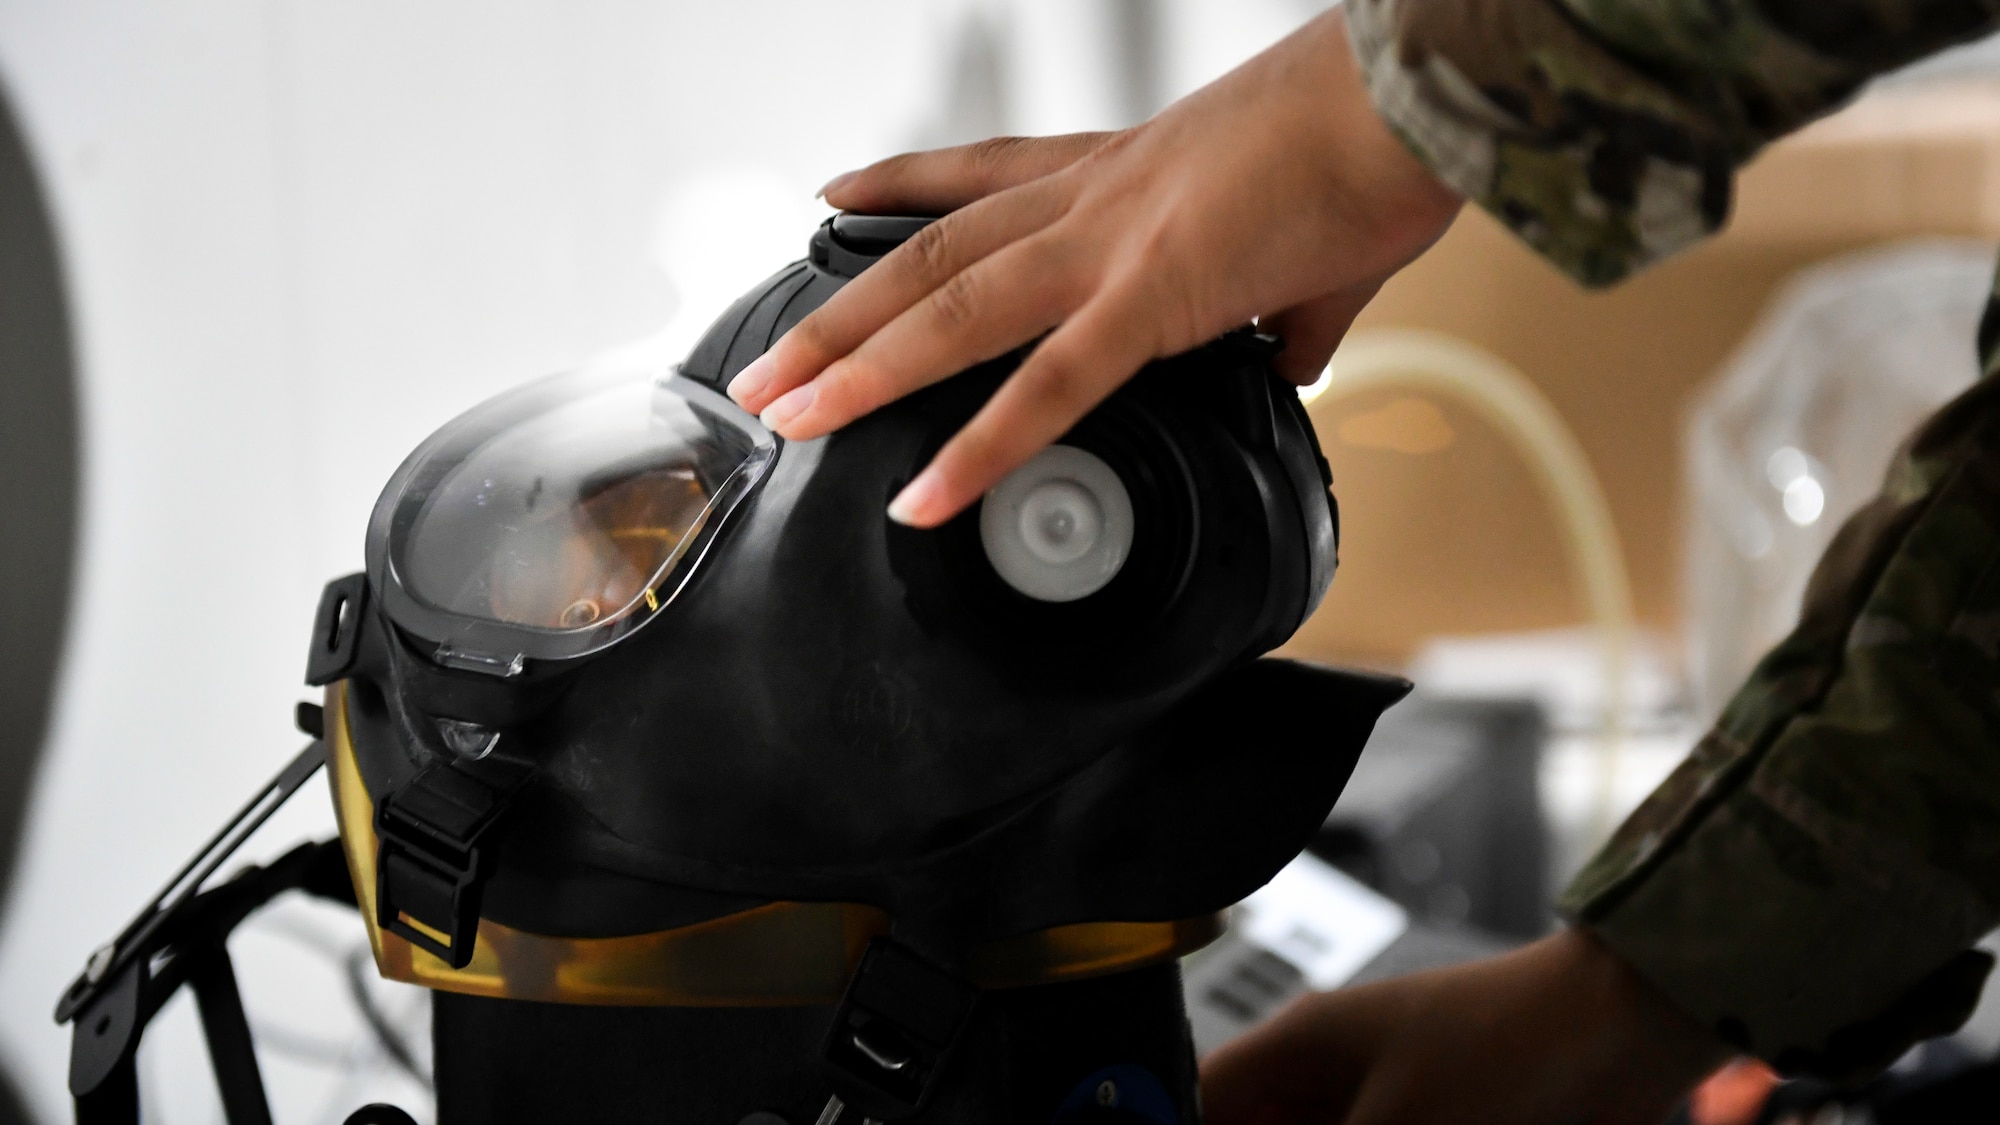 Airman 1st Class Brianna Renninger, 386th Expeditionary Logistics Readiness Squadron expeditionary theater distribution center journeyman, tests an M-50 joint service general purpose mask, at a theater distribution center on Ali Al Salem Air Base, Kuwait, Aug. 13, 2019. The masks are tested for marks, scratches and broken seals that would render the mask ineffective in an emergency situation. (U.S. Air Force photo by Staff Sgt. Mozer O. Da Cunha)